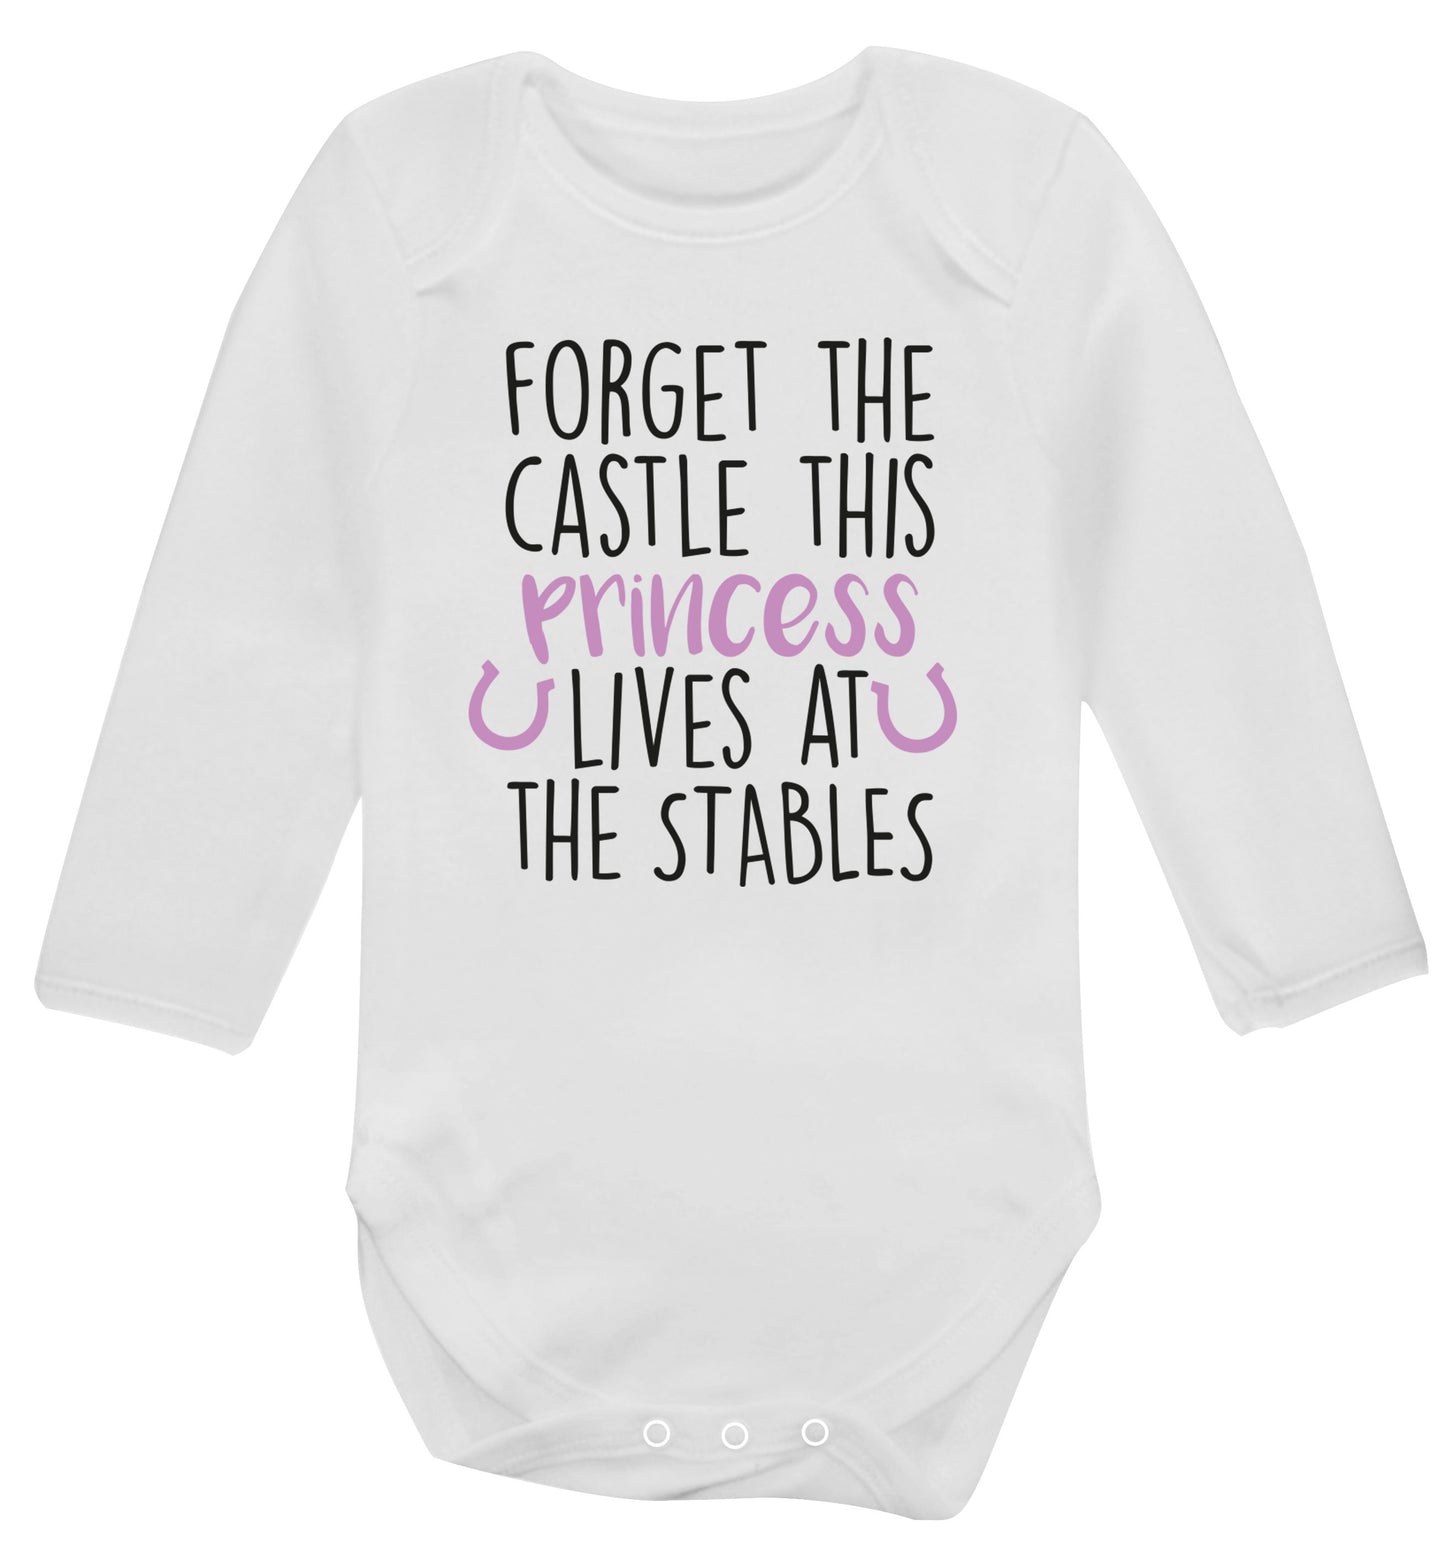 Forget the castle this princess lives at the stables Baby Vest long sleeved white 6-12 months